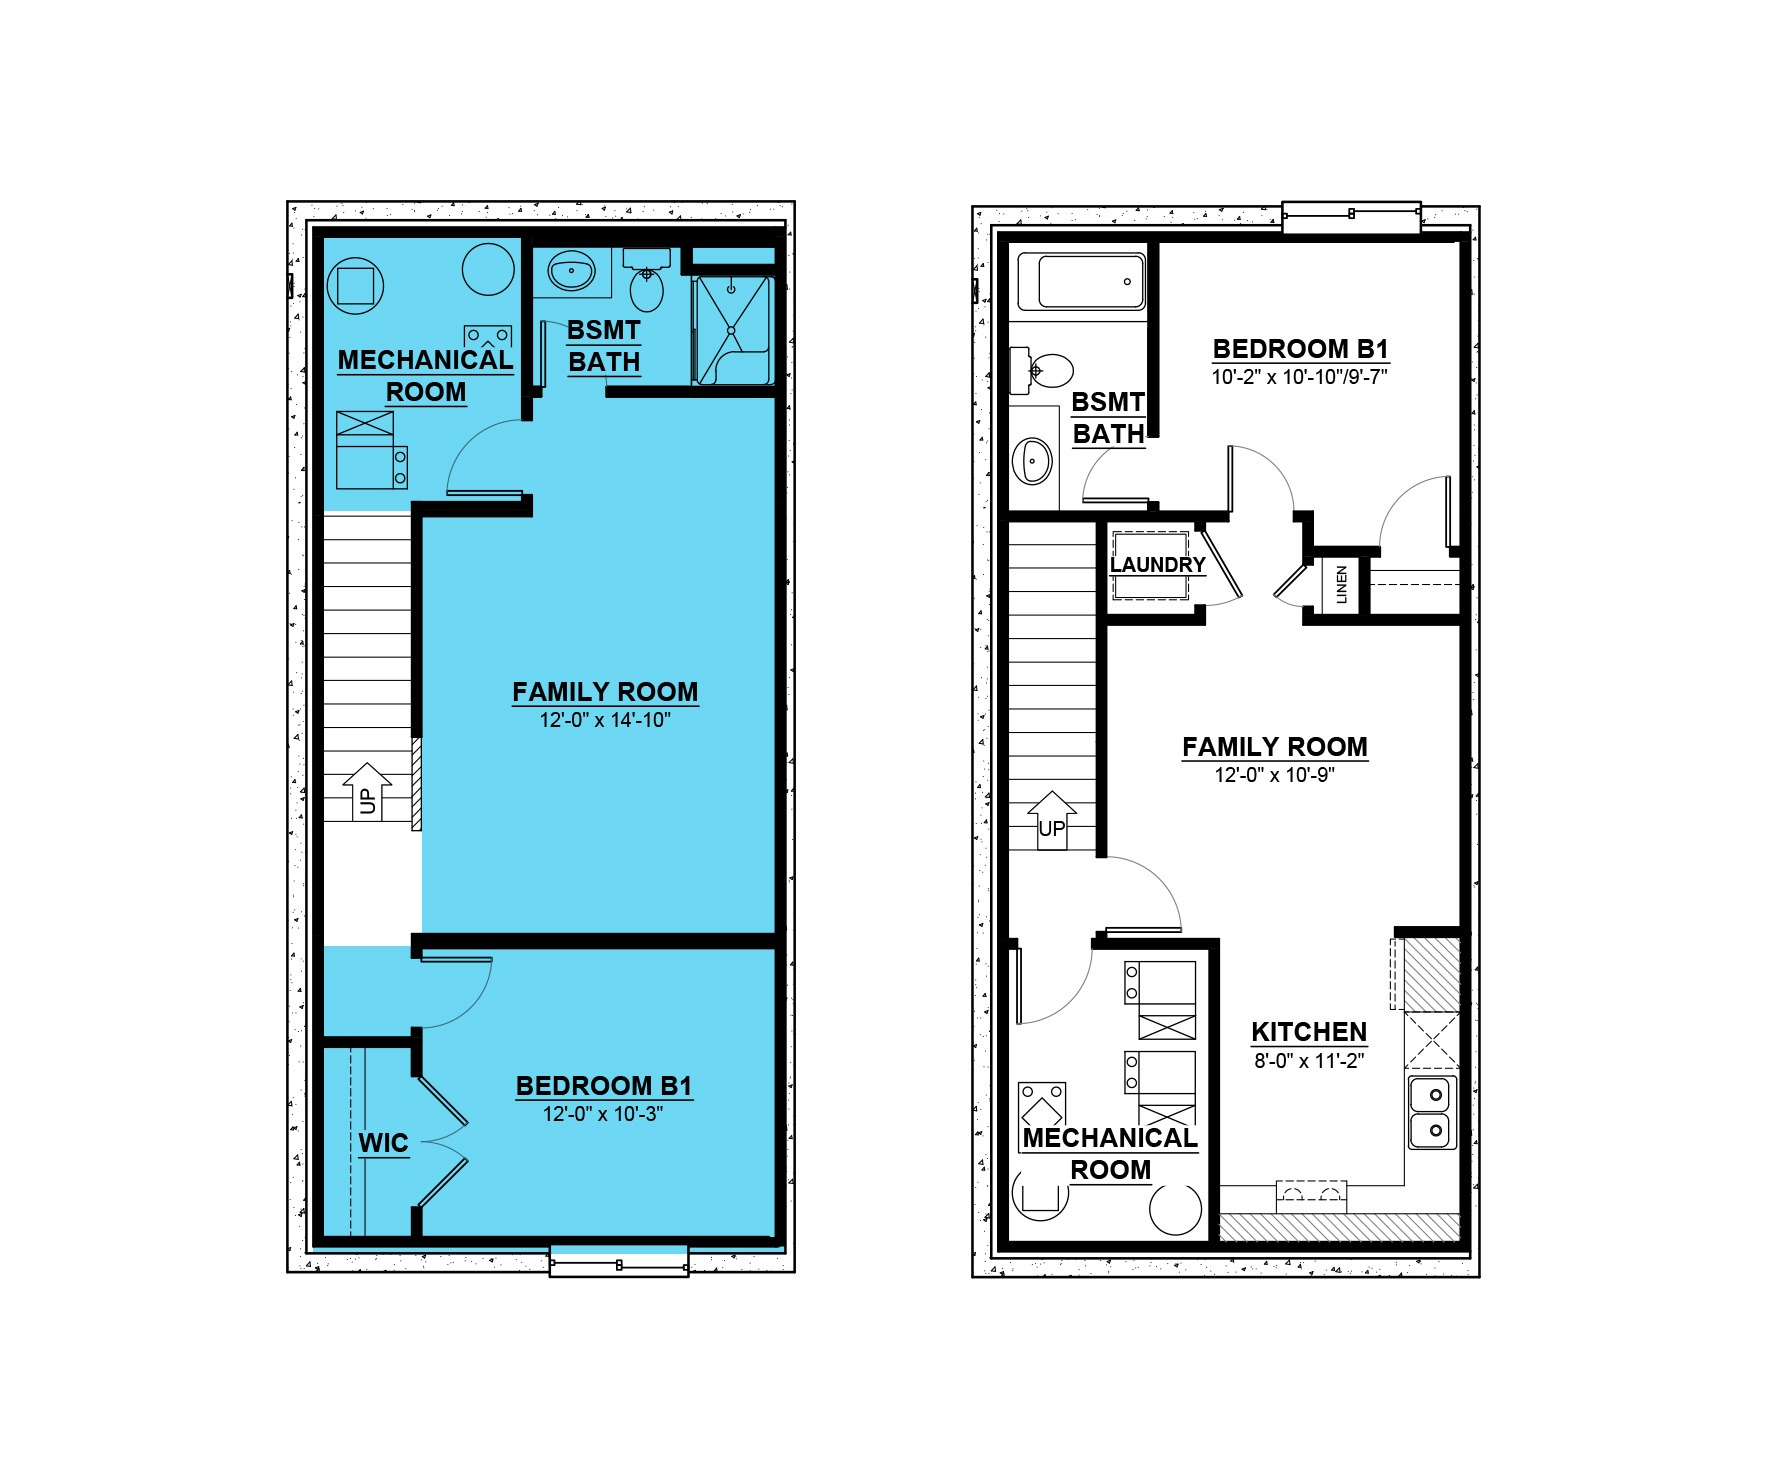 FOCUS-D Floor Plan of Saxony Glen by Daytona Homes with undefined beds